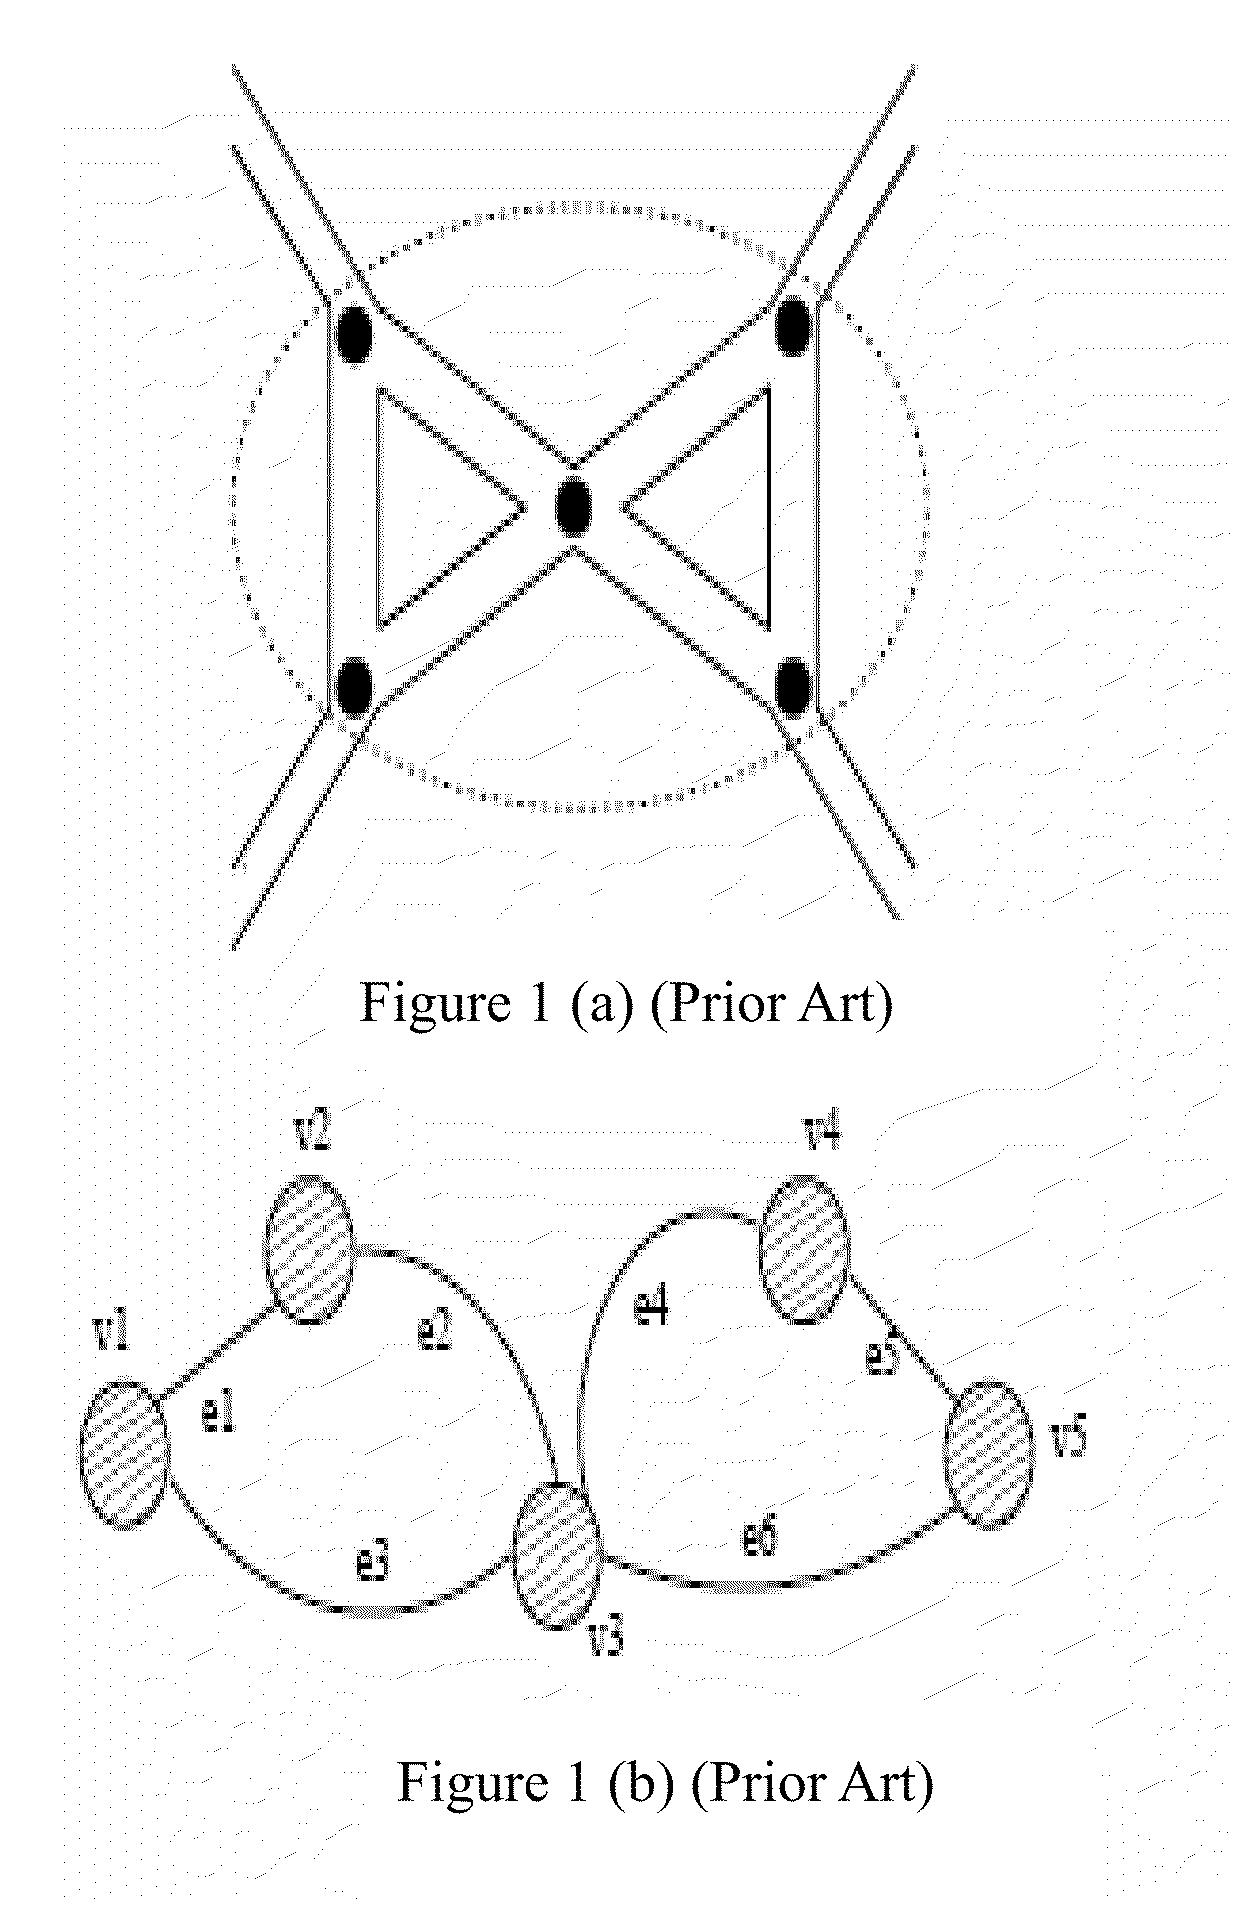 Method and apparatus for identifying similar sub-graphs in a network